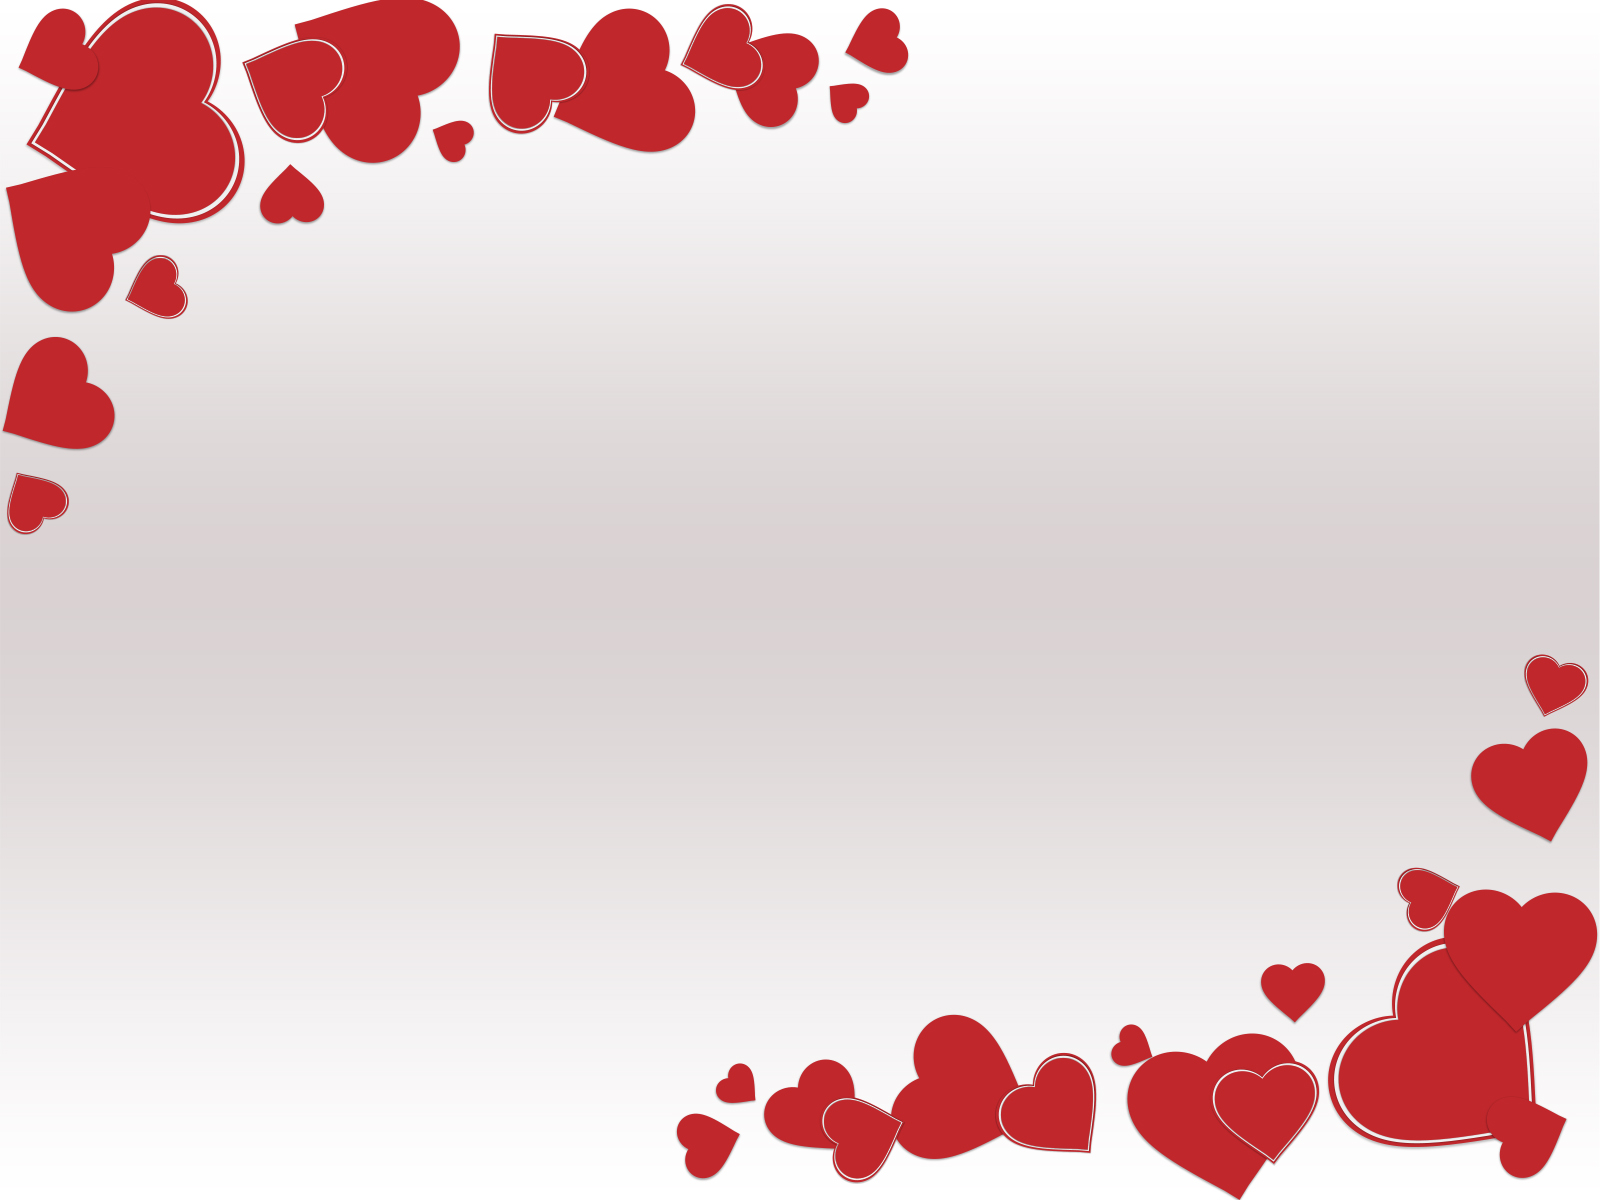 Free Download Grunge Valentine Day Backgrounds Love Red White PPT 1600x1200 For Your Desktop 